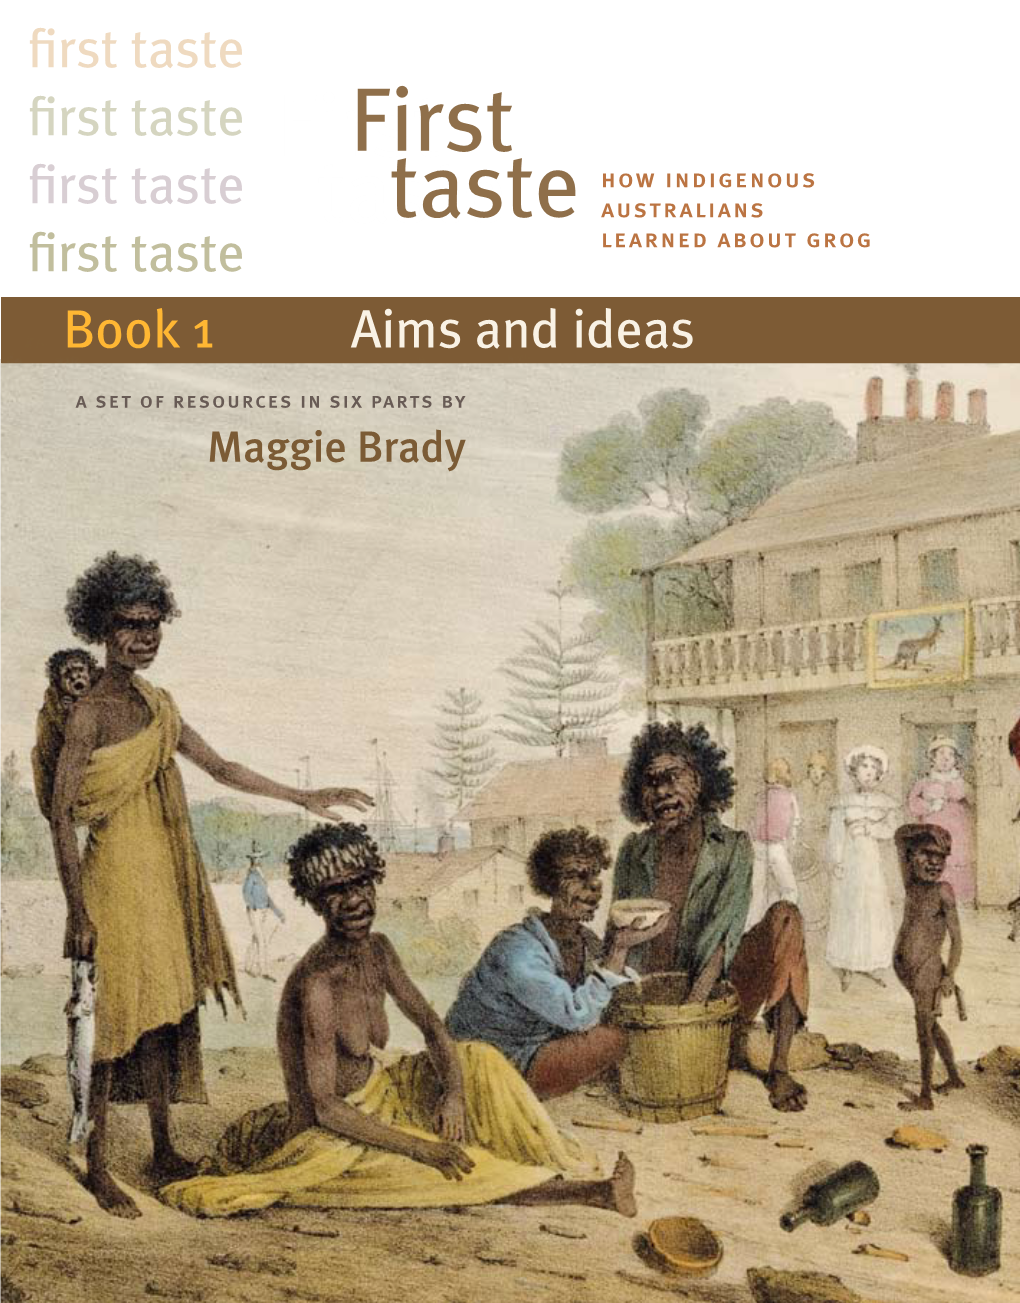 First Taste How Indigenous Taste Taste Australians First Taste Learned About Grog Book 1 Aims and Ideas